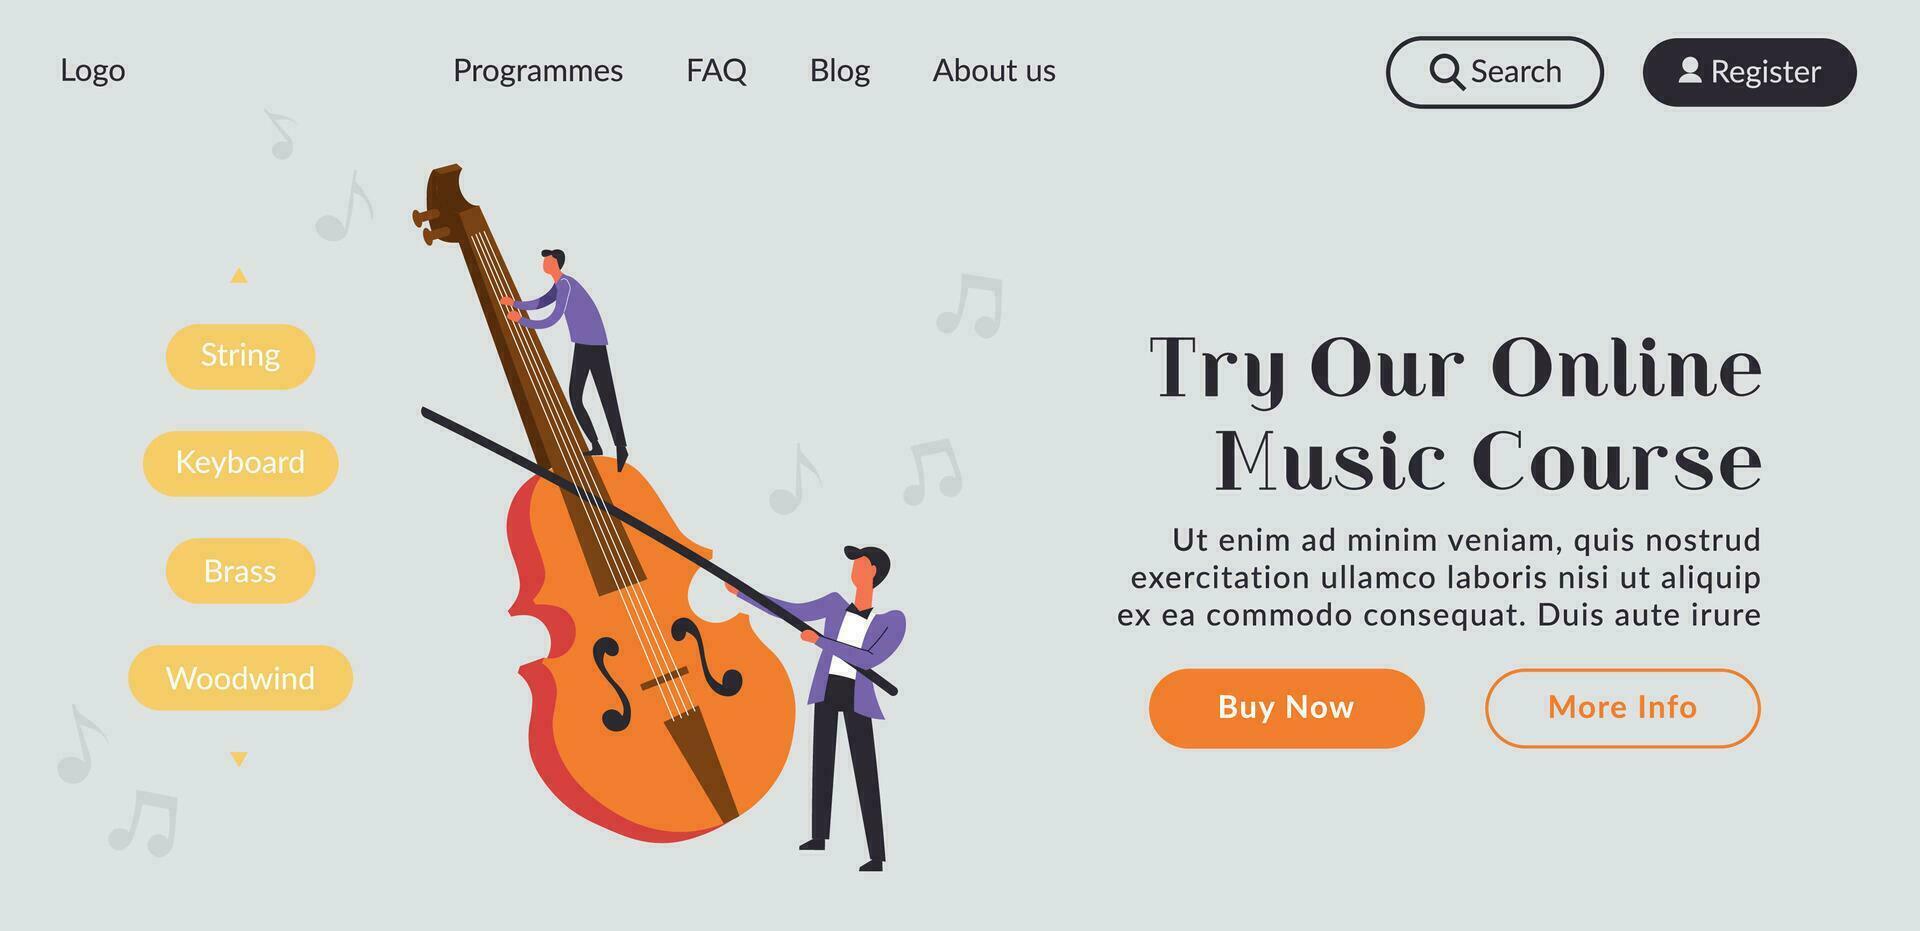 Online music course and classes on violin, website vector